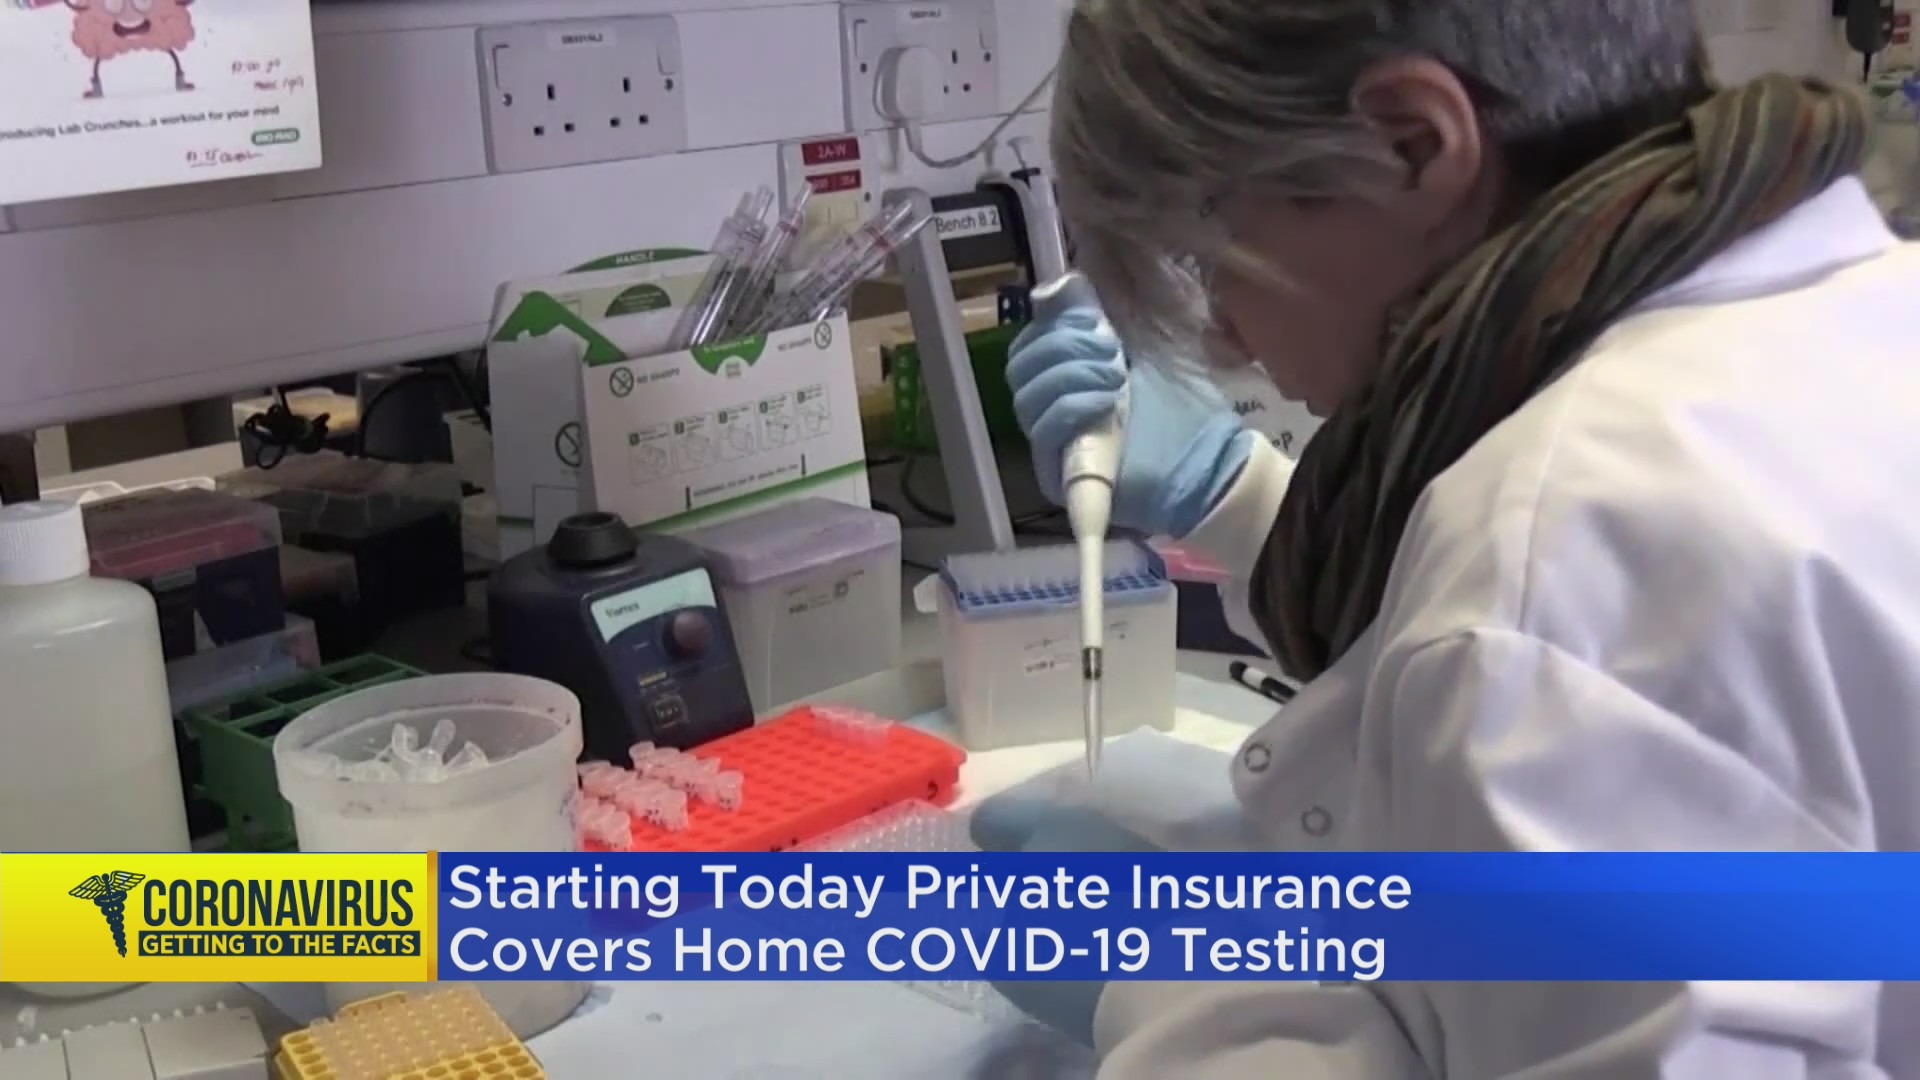 Private insurance now covers COVID-19 testing at home – CBS Chicago